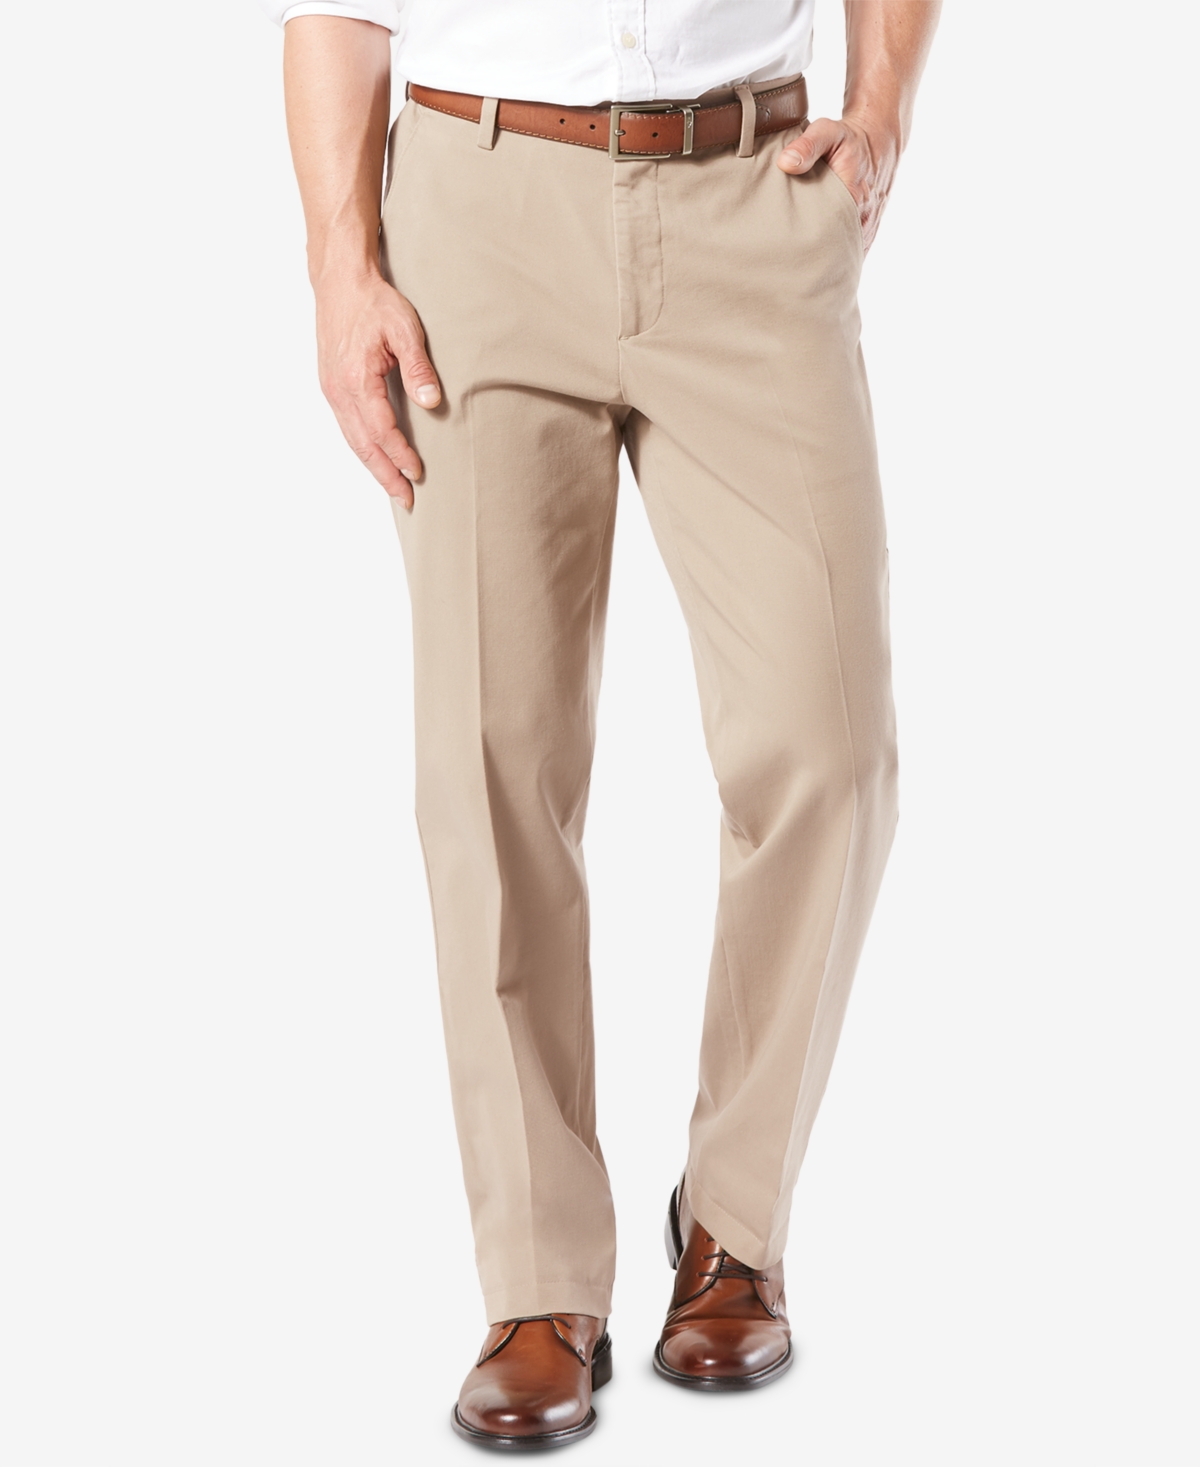 Men's Workday Smart 360 Flex Classic Fit Khaki Stretch Pants - Med Brown